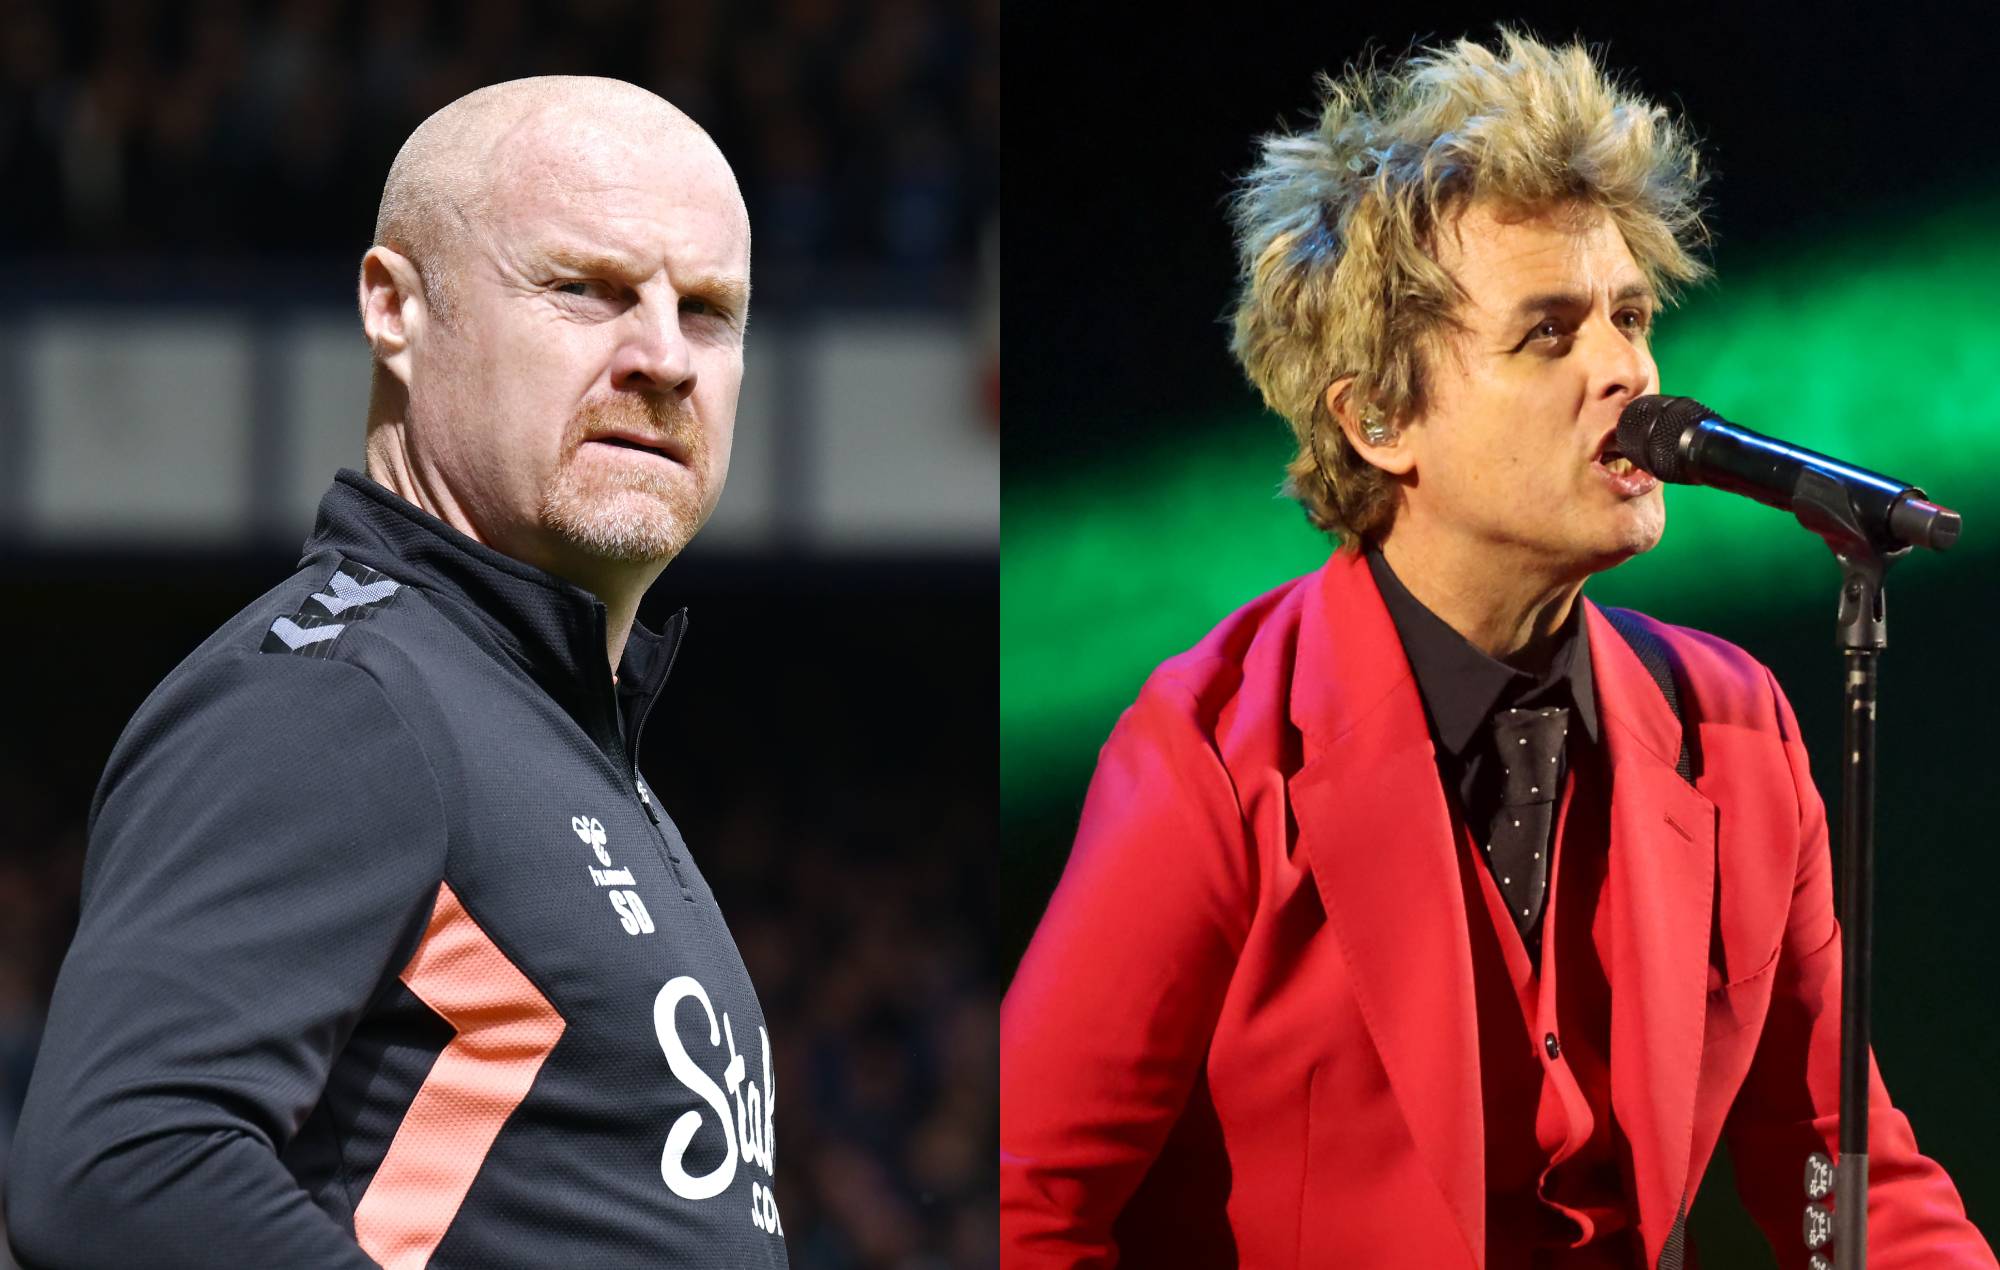 Sean Dyche and Green Day's Billie Joe Armstrong. Credit: Tony McArdle and Amy Sussman via GETTY